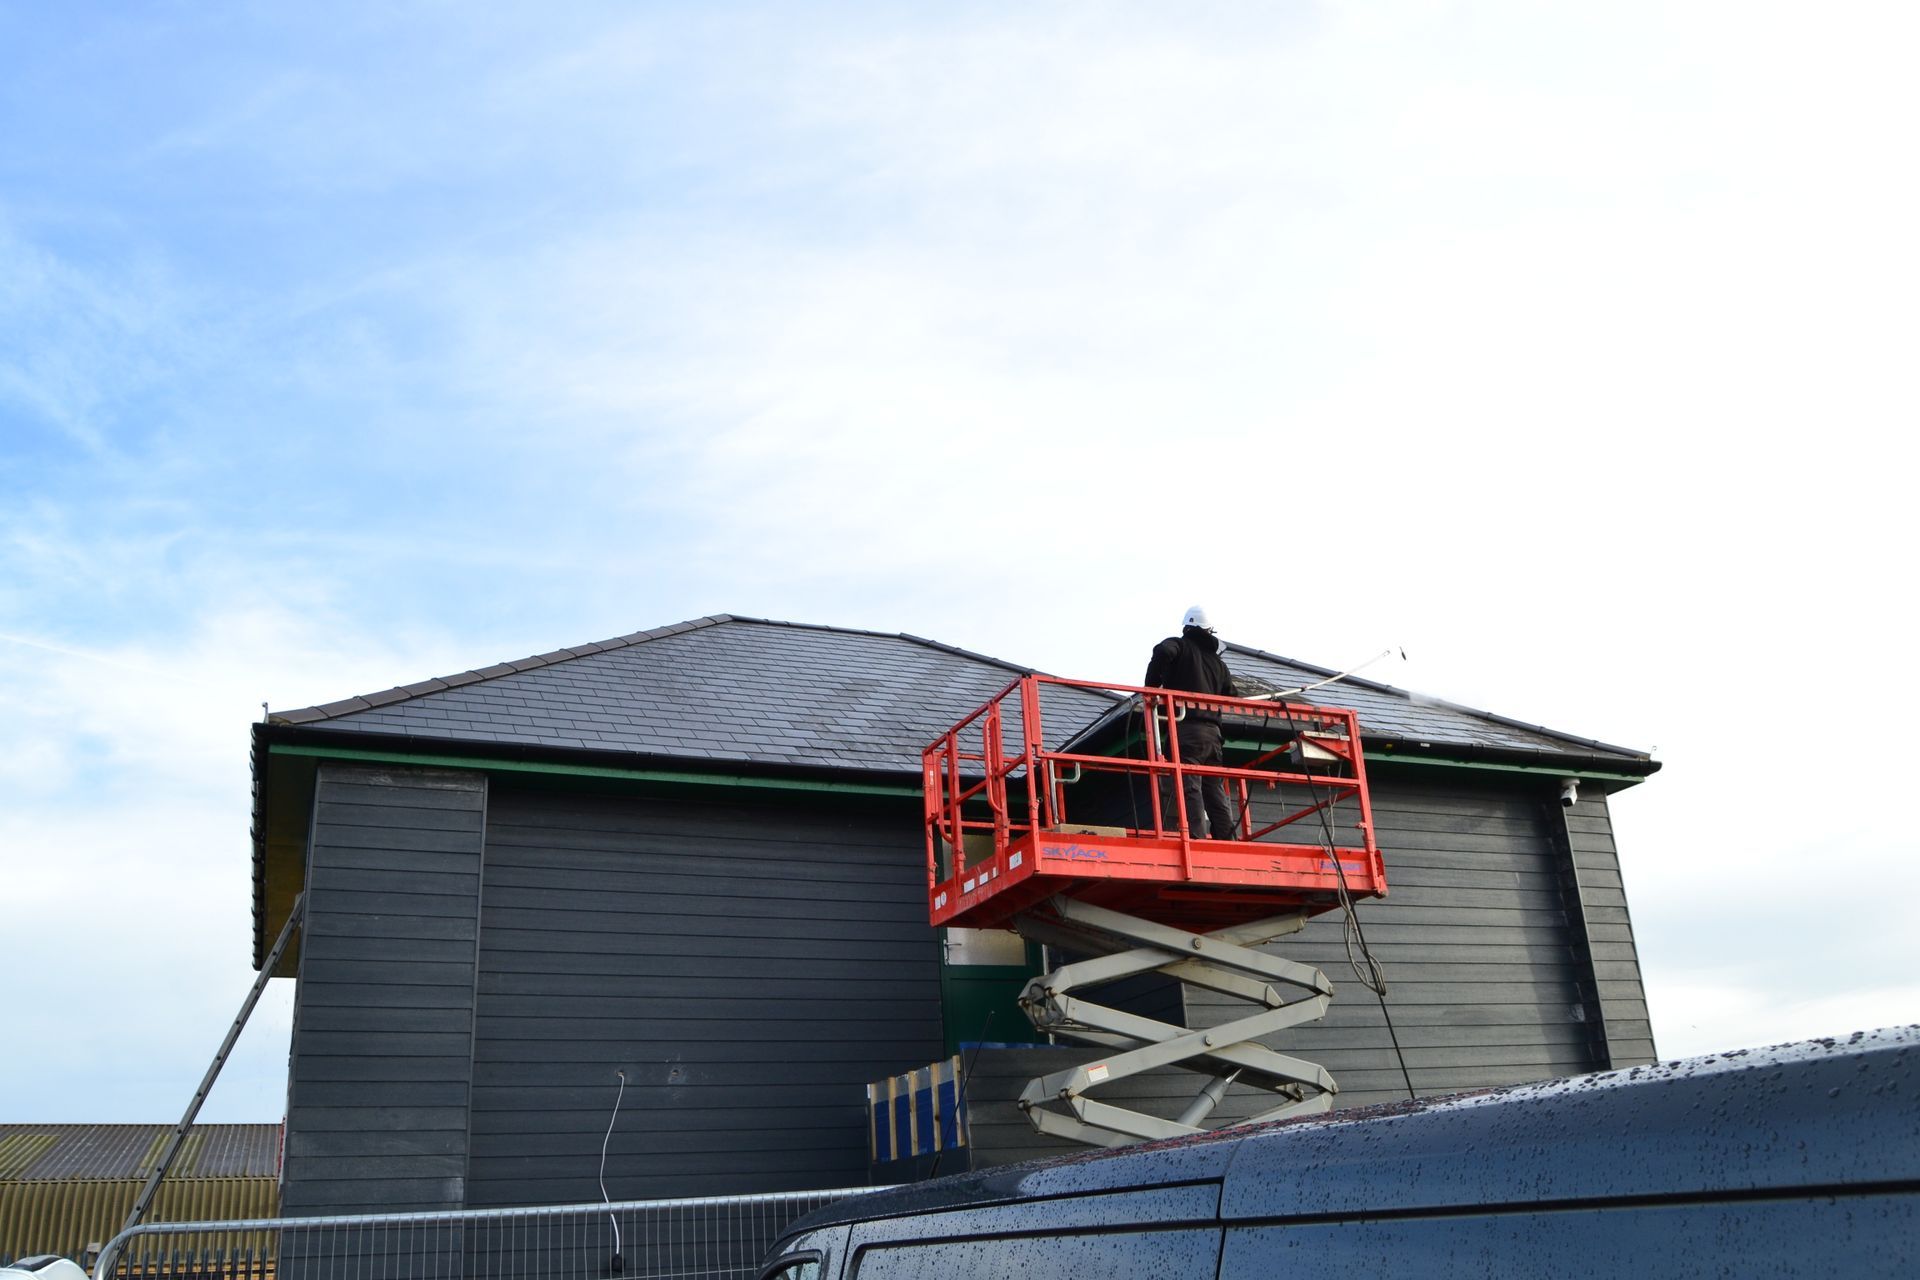 Commercial roof cleaning using a lift for safe access